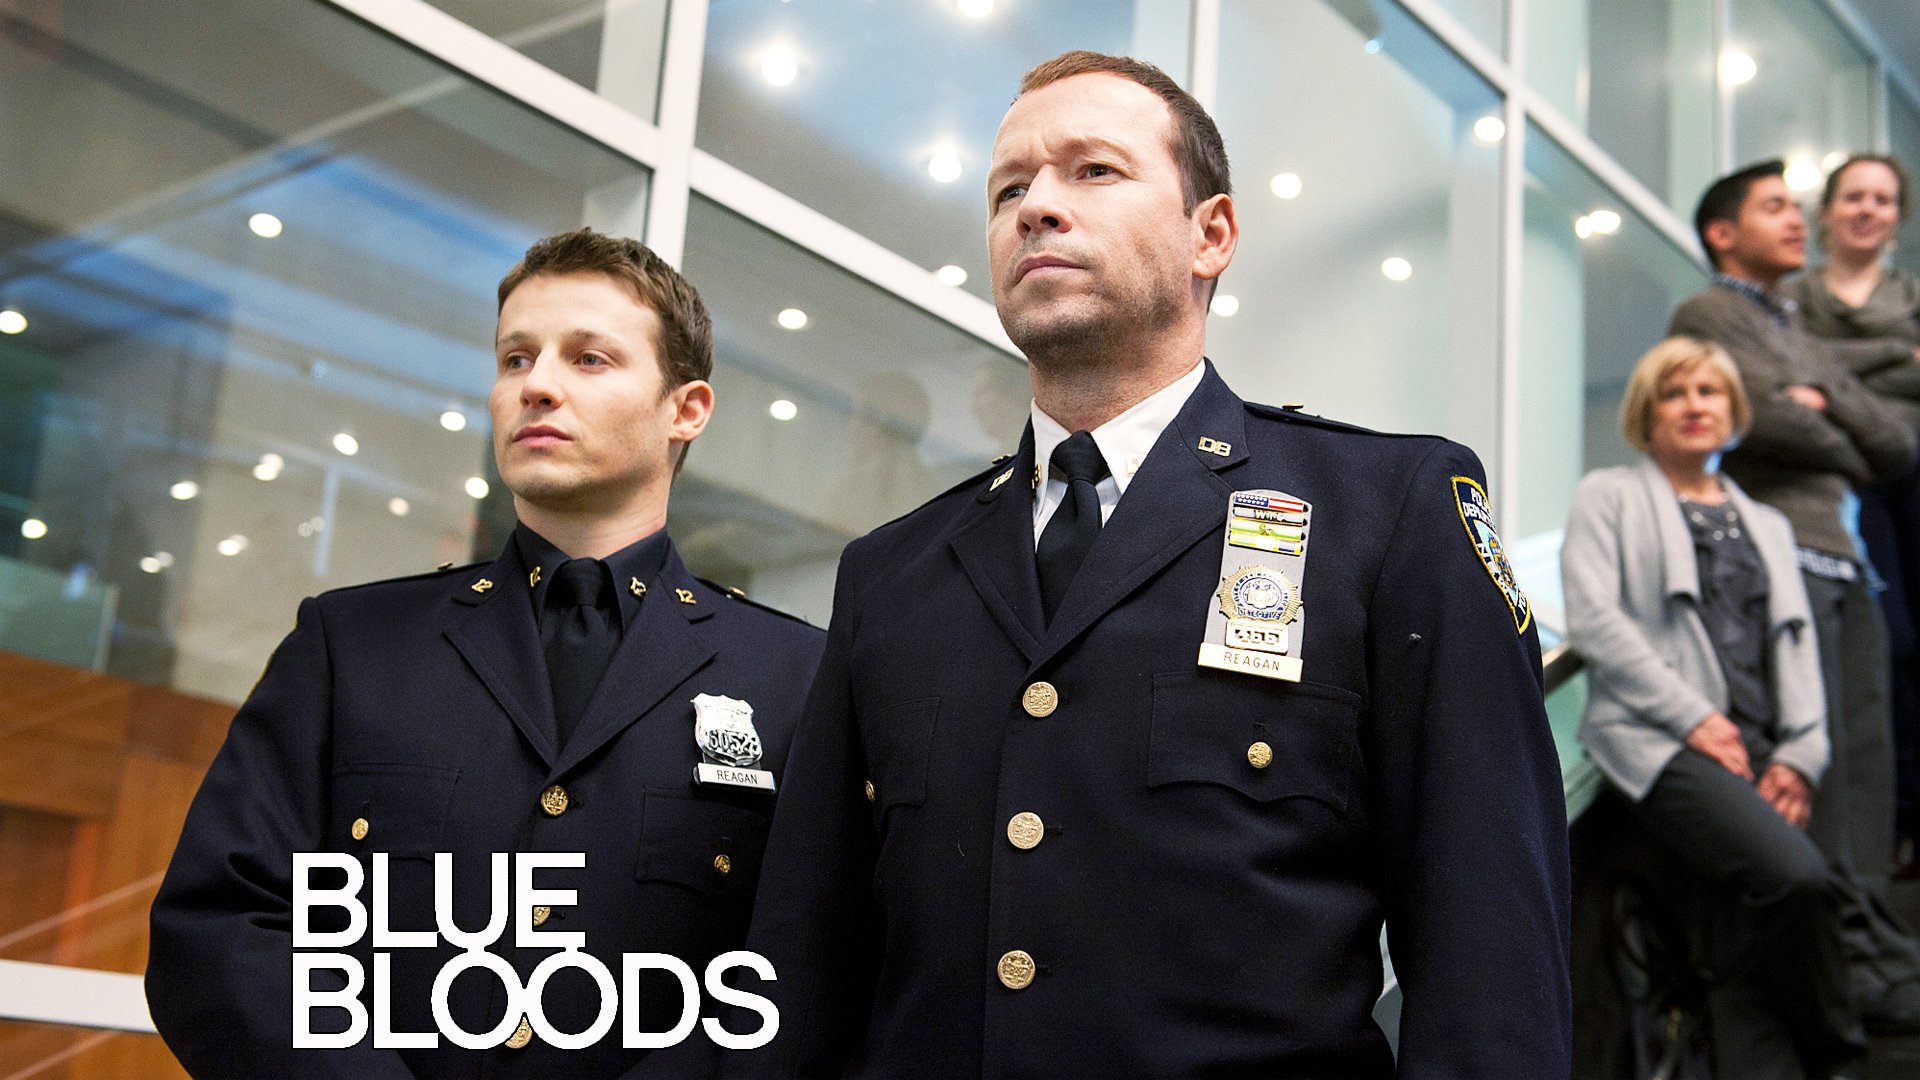 20+ Blue Bloods HD Wallpapers and Backgrounds.